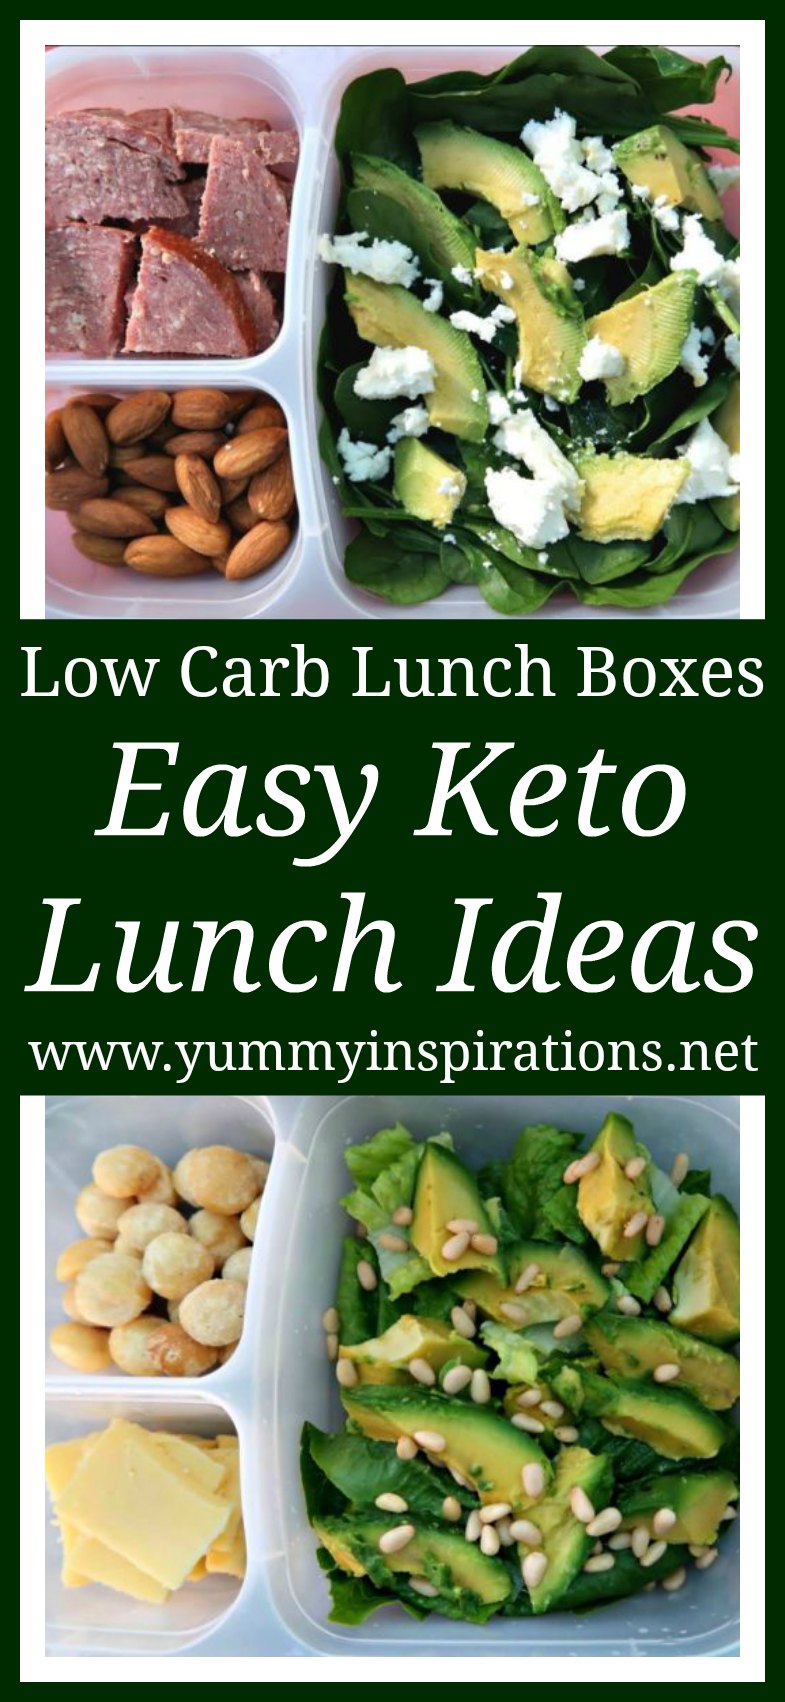 https://yummyinspirations.net/wp-content/uploads/2017/02/Easy-Keto-Lunch-Ideas-Low-Carb-Lunches-for-work-and-lunch-boxes-with-recipes.jpg